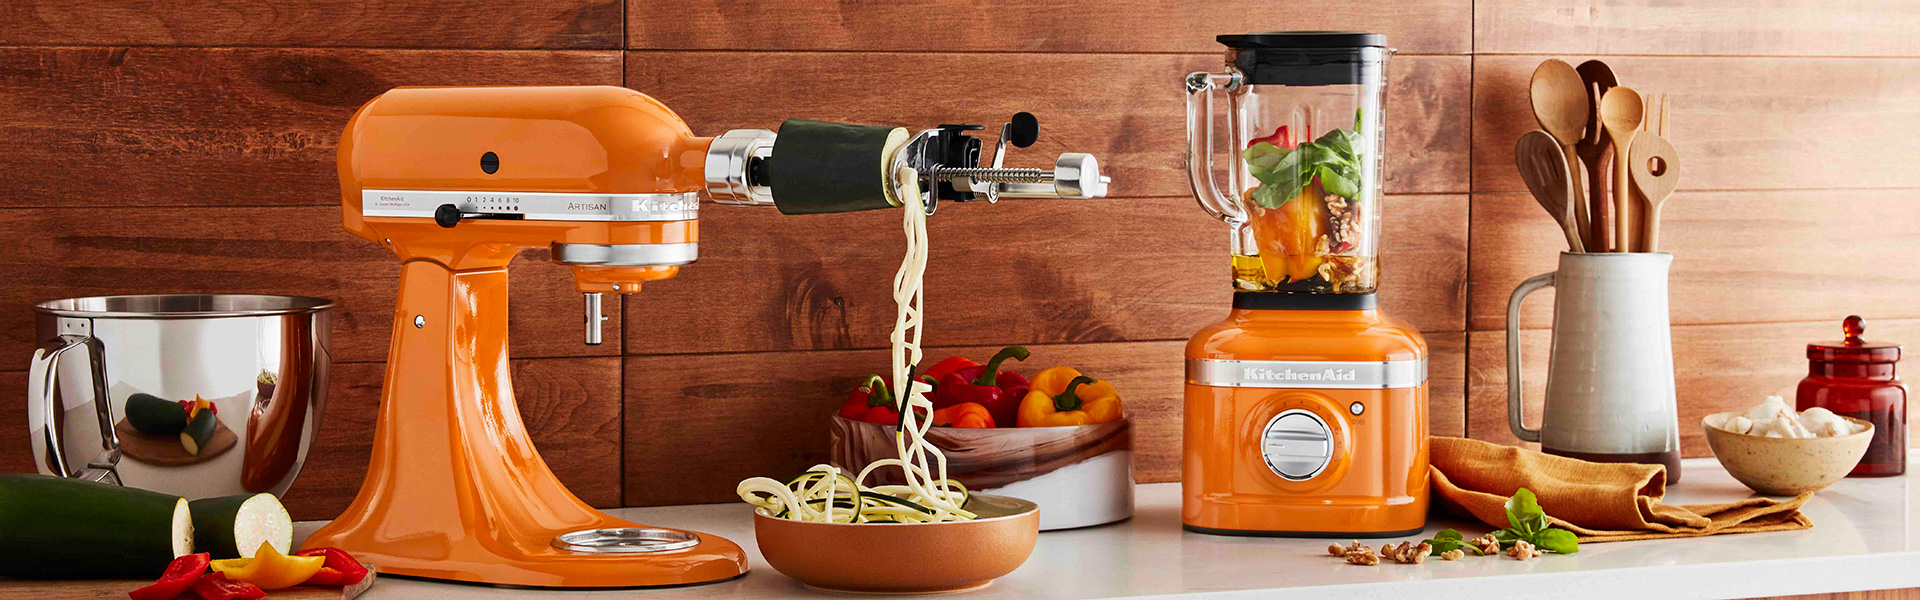 kitchenaid honey blender and artisan mixer in a wood and tile kitchen - goodhomesmagazine.com